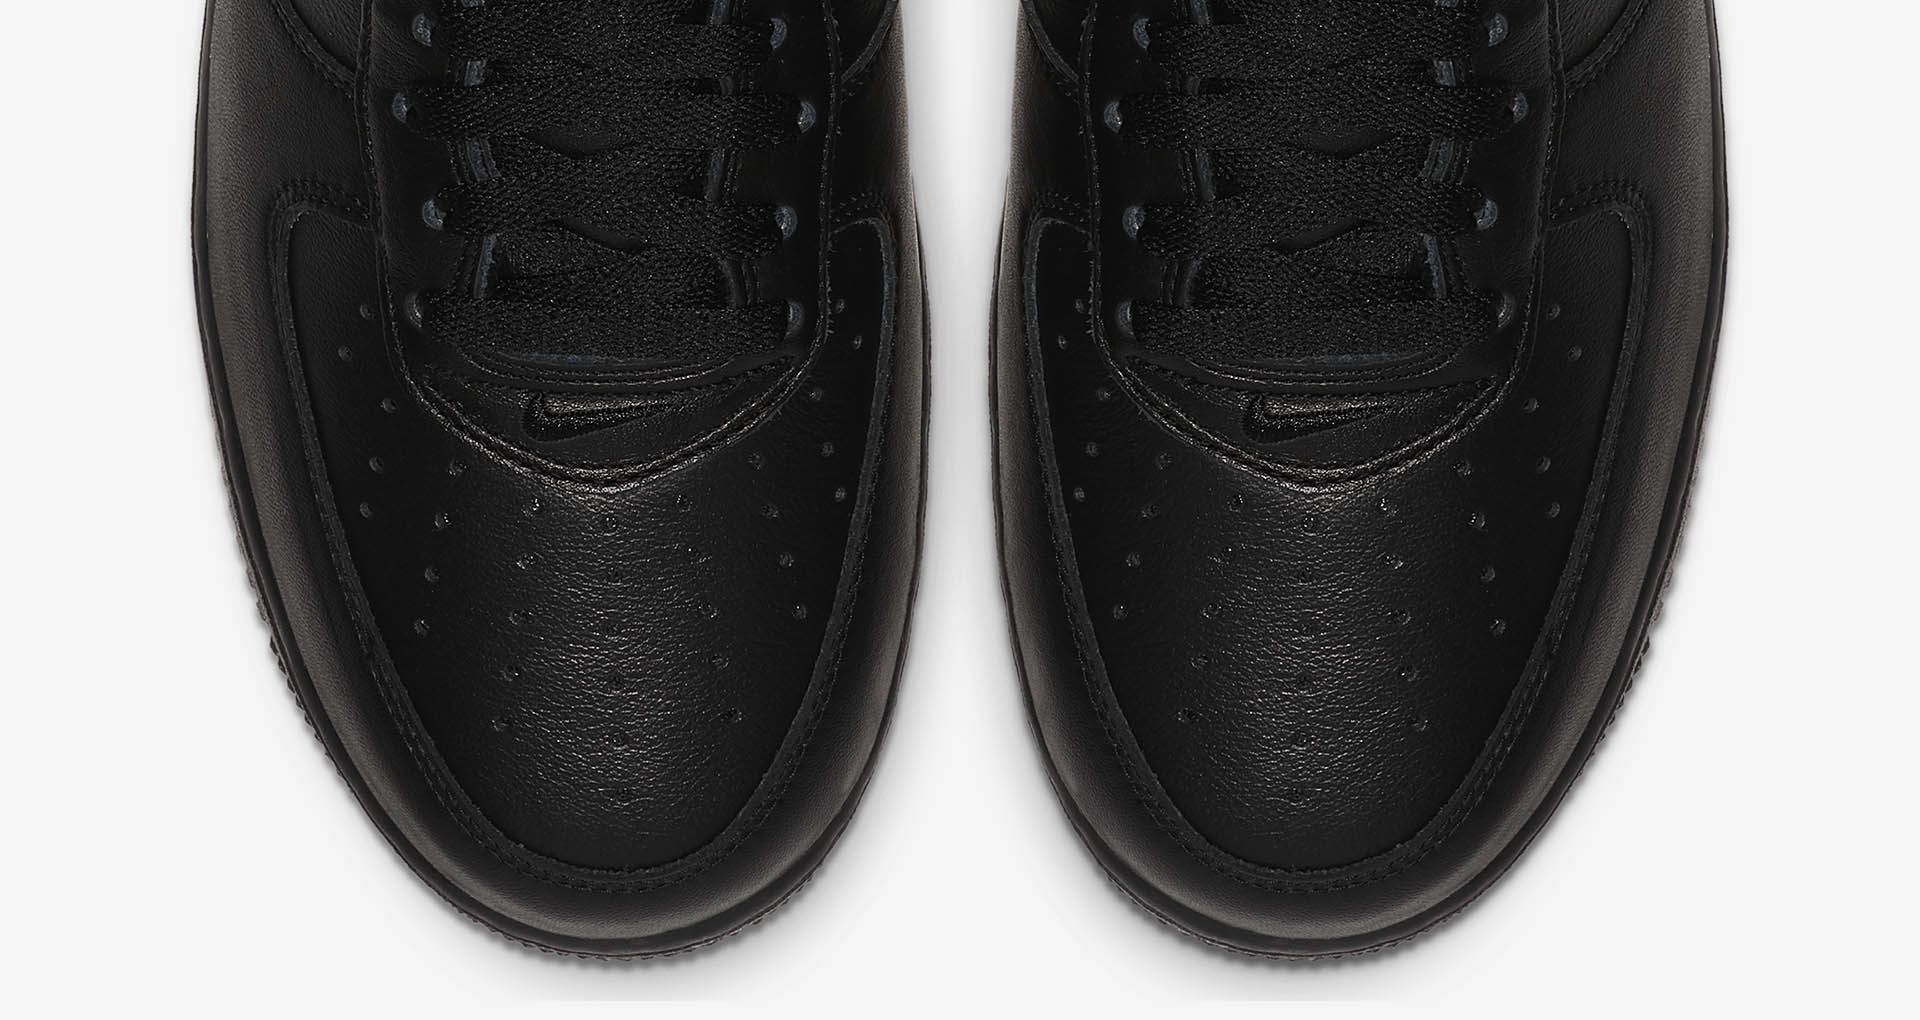 Air Force 1 'Black / White' Release Date. Nike SNKRS